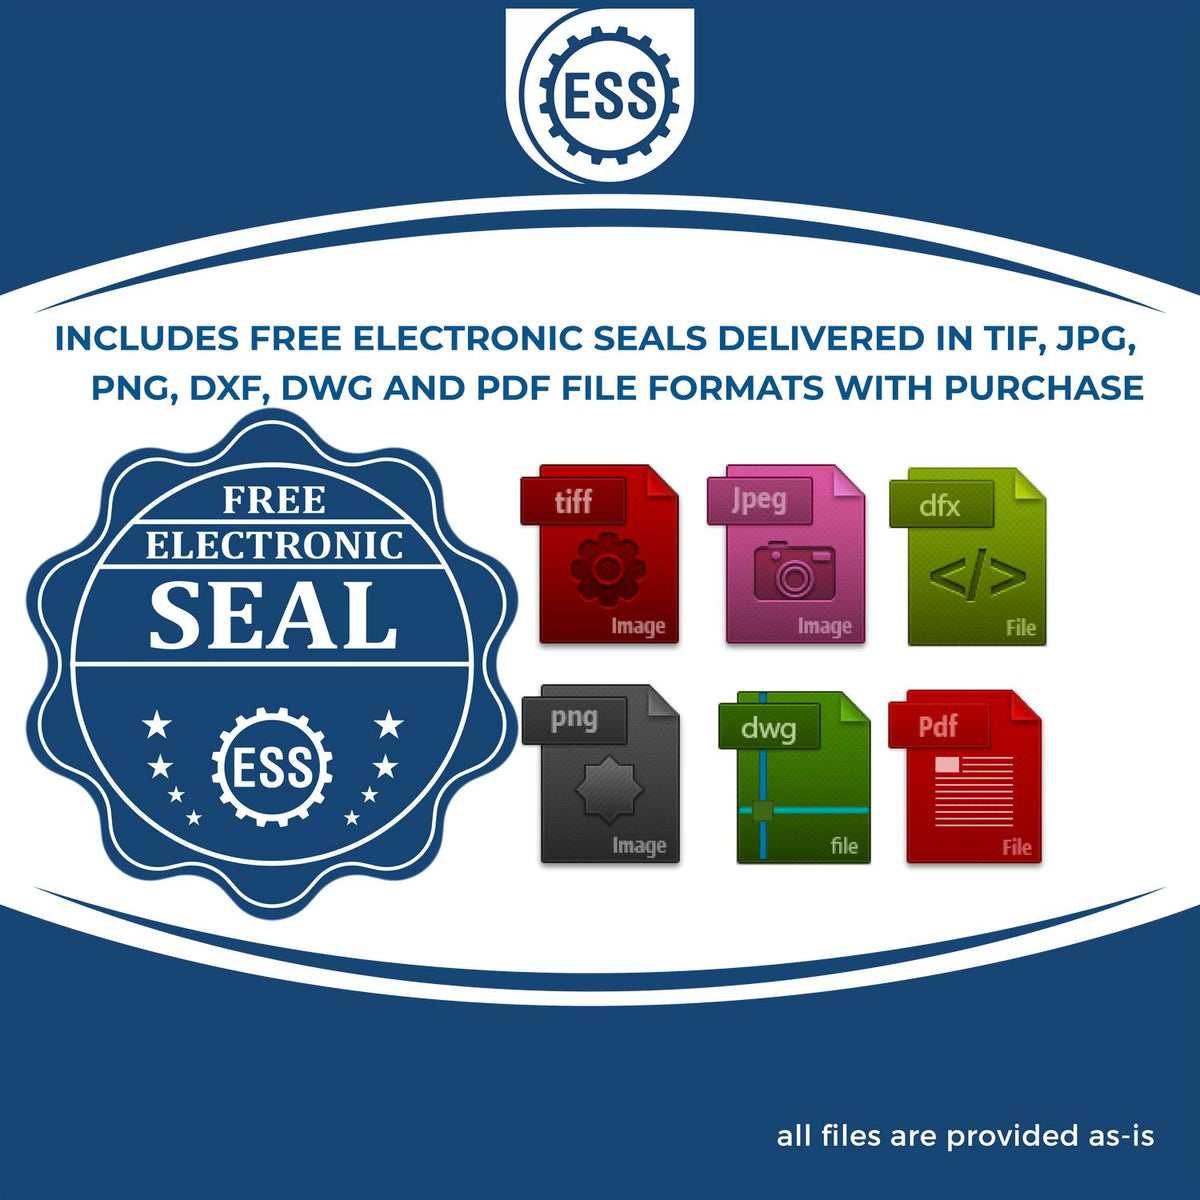 An infographic for the free electronic seal for the MaxLight Premium Pre-Inked Kansas State Seal Notarial Stamp illustrating the different file type icons such as DXF, DWG, TIF, JPG and PNG.